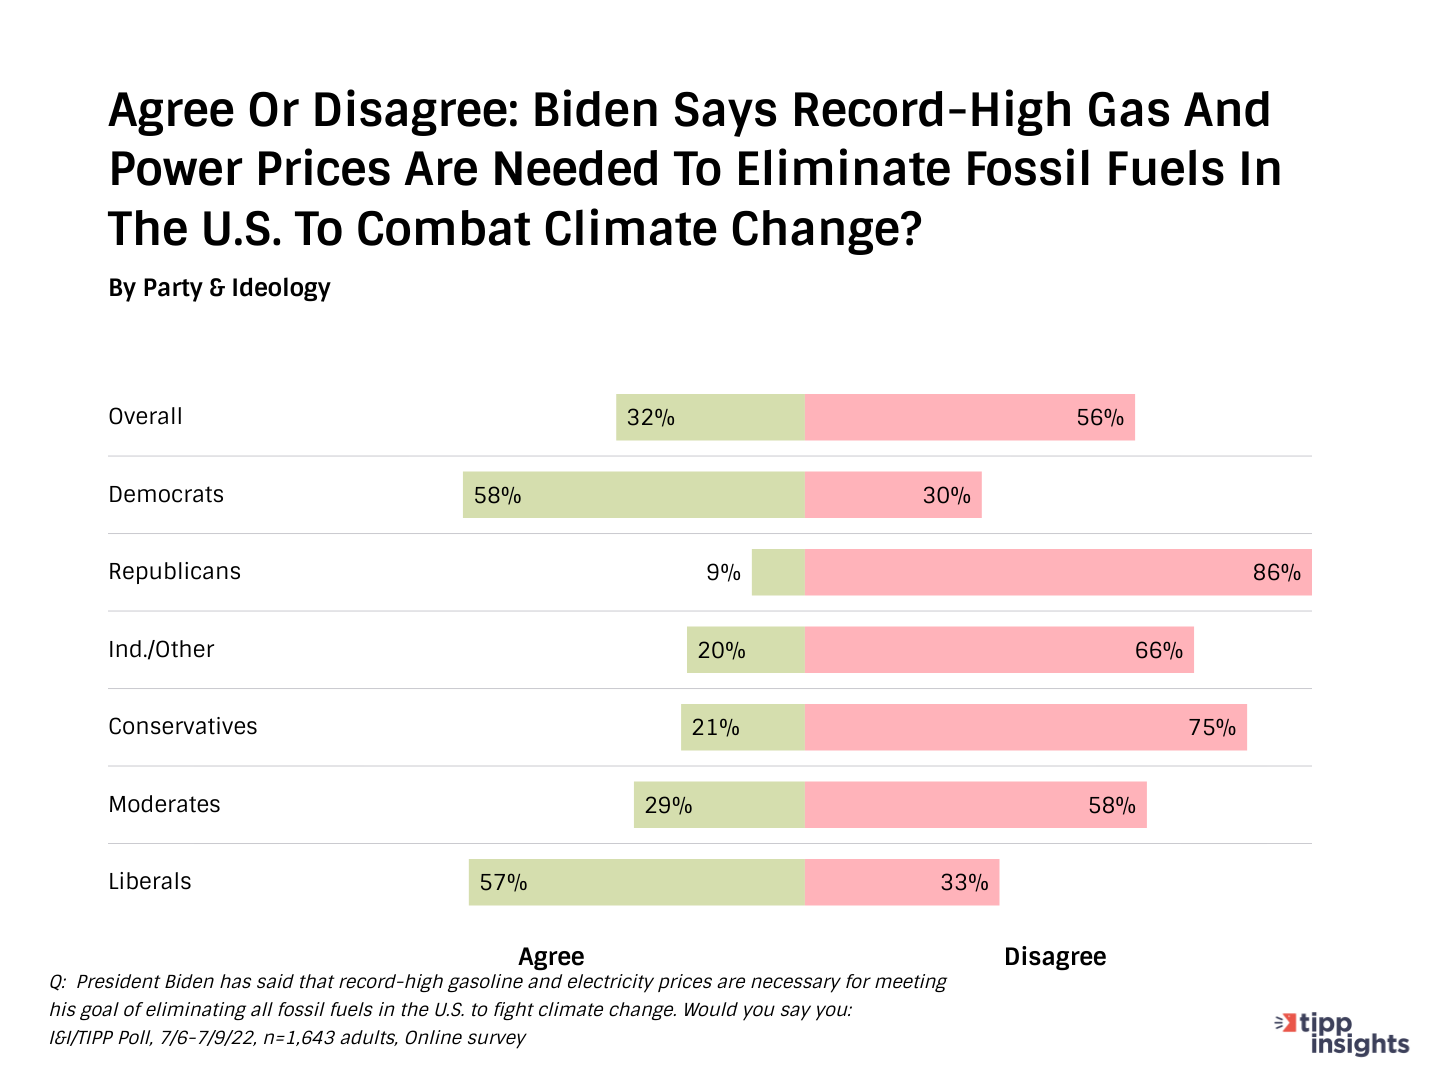 I&I/TIPP Poll Results: Do americans think high gas and power prices will help combat climate change? along party lines